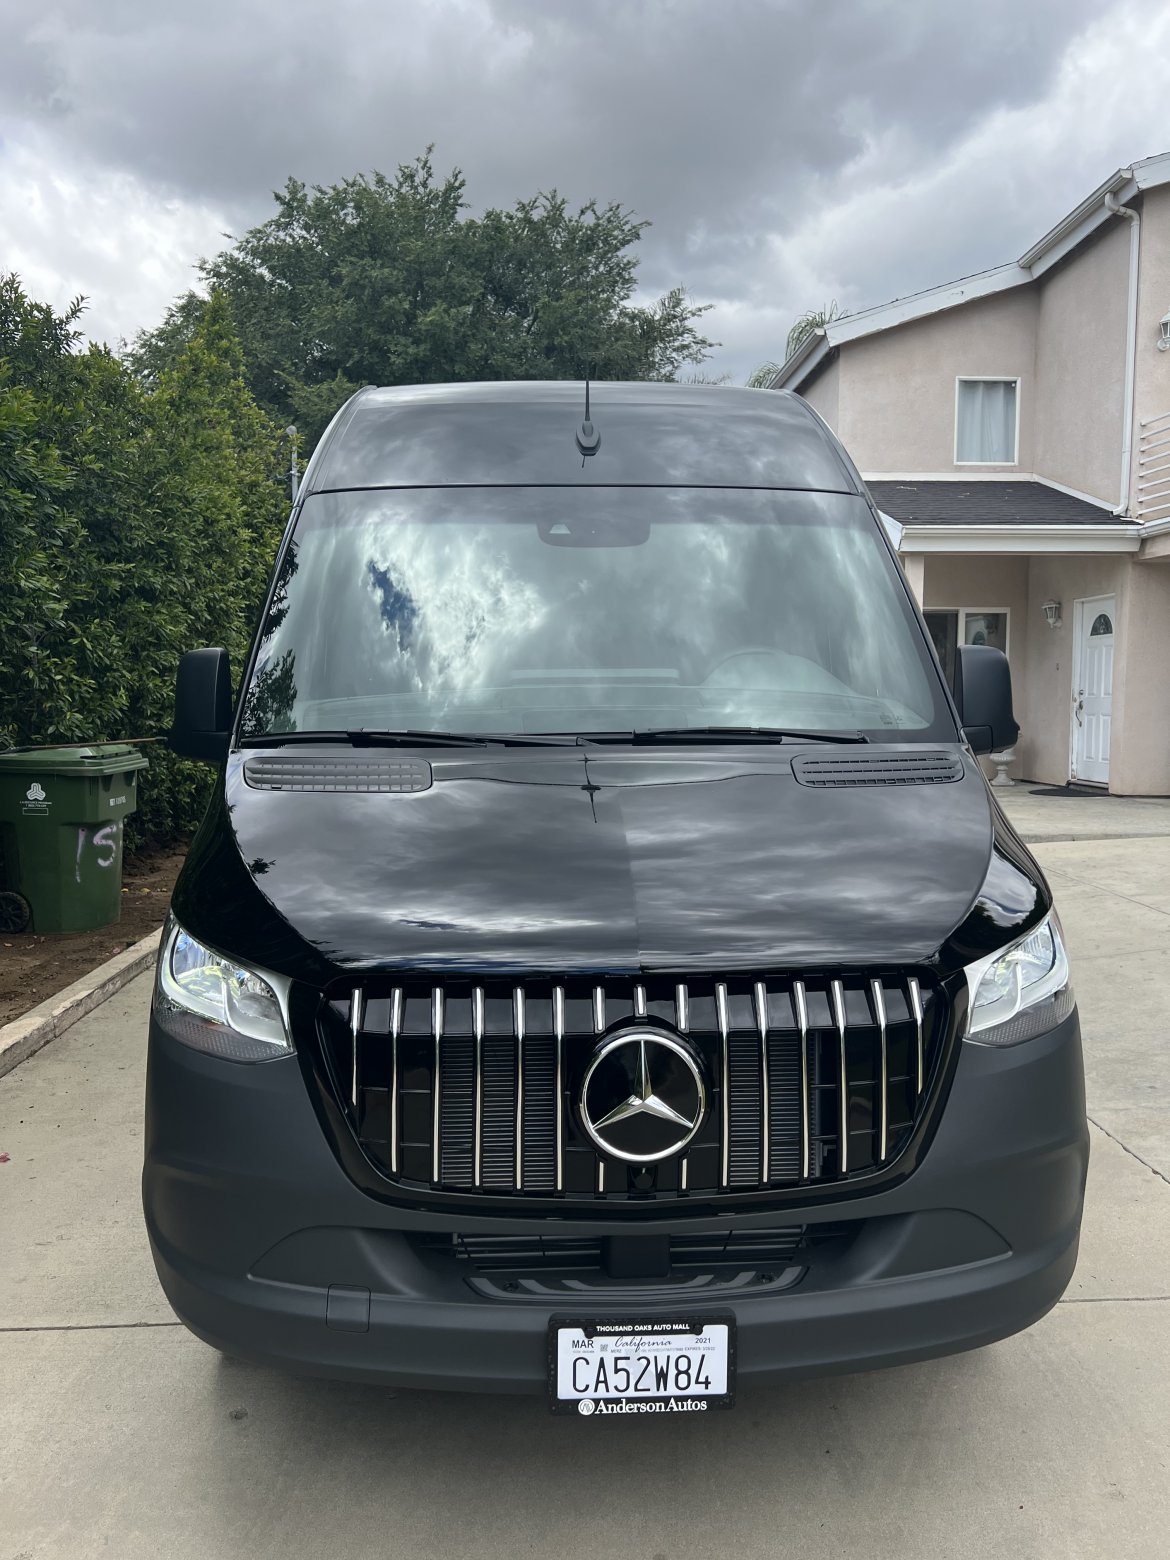 Executive Shuttle for sale: 2021 Mercedes-Benz 3500 Sprinter Executive Package 170&quot; by Contact for additional information